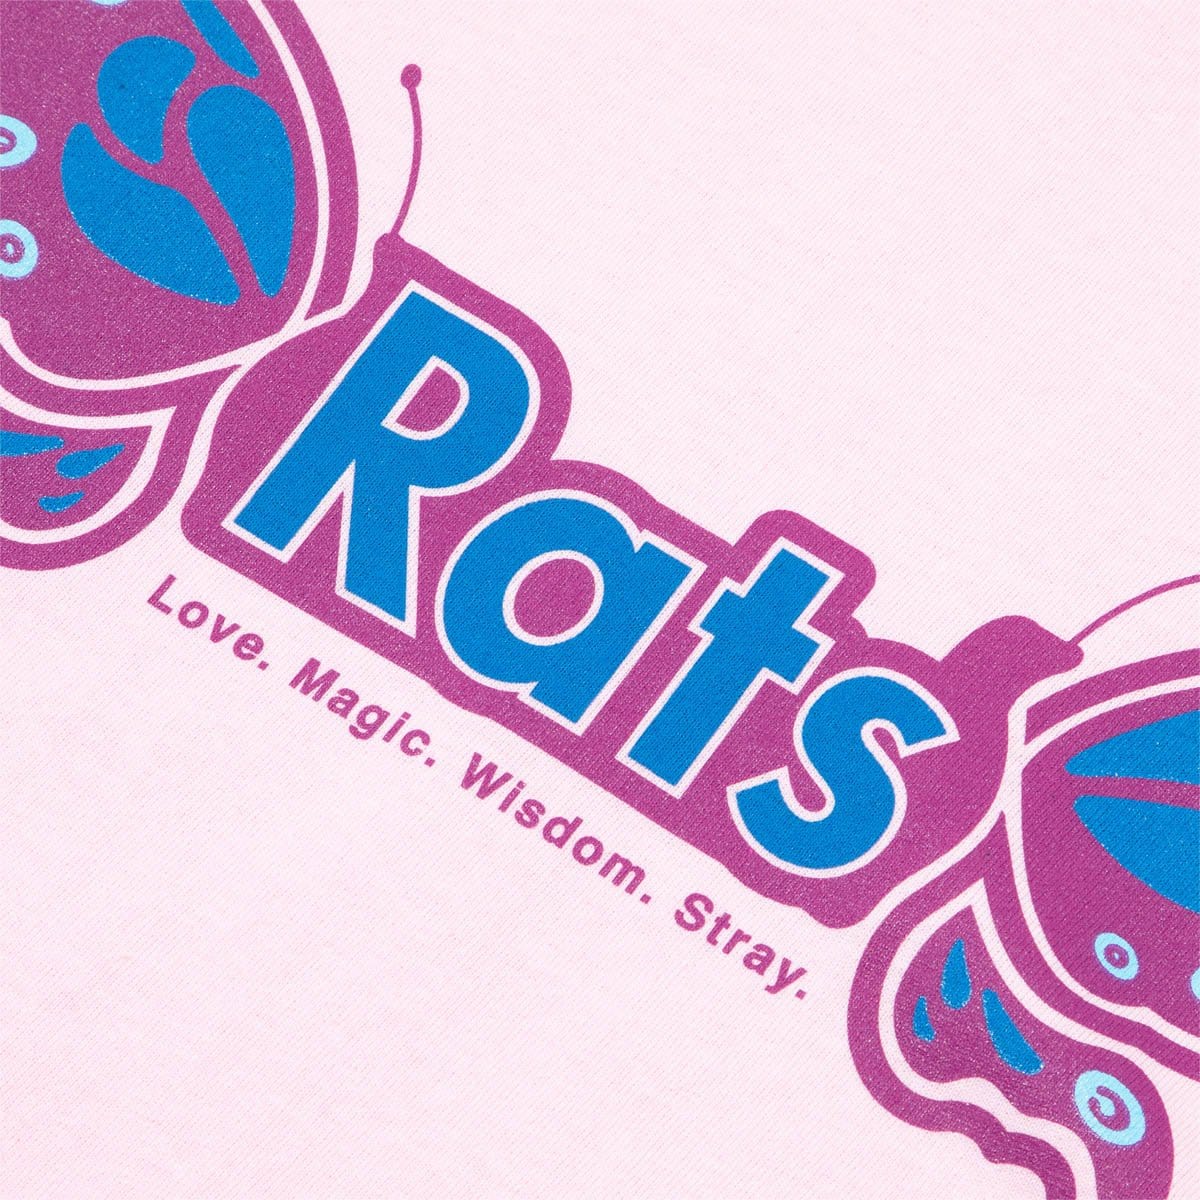 Stray Rats T-Shirts BUTTERFLY TEE